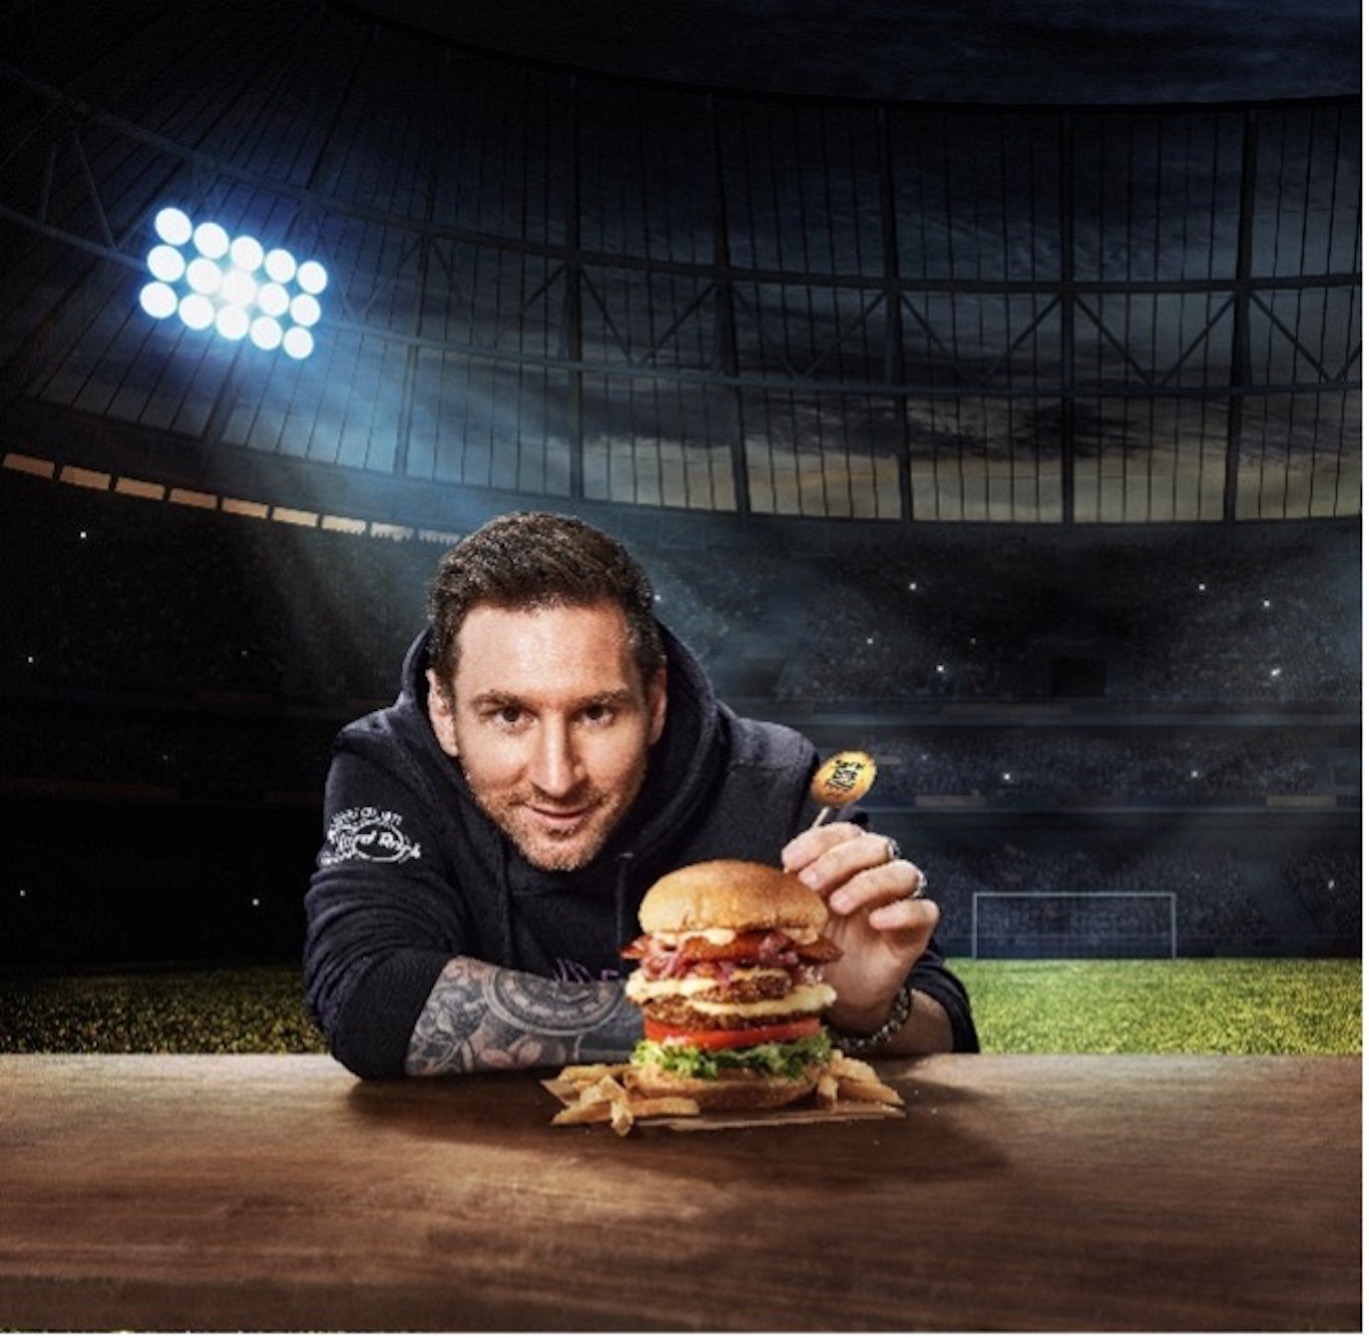 Lionel Messi Has His Own Burger! Try It At The Hard Rock Cafe LV